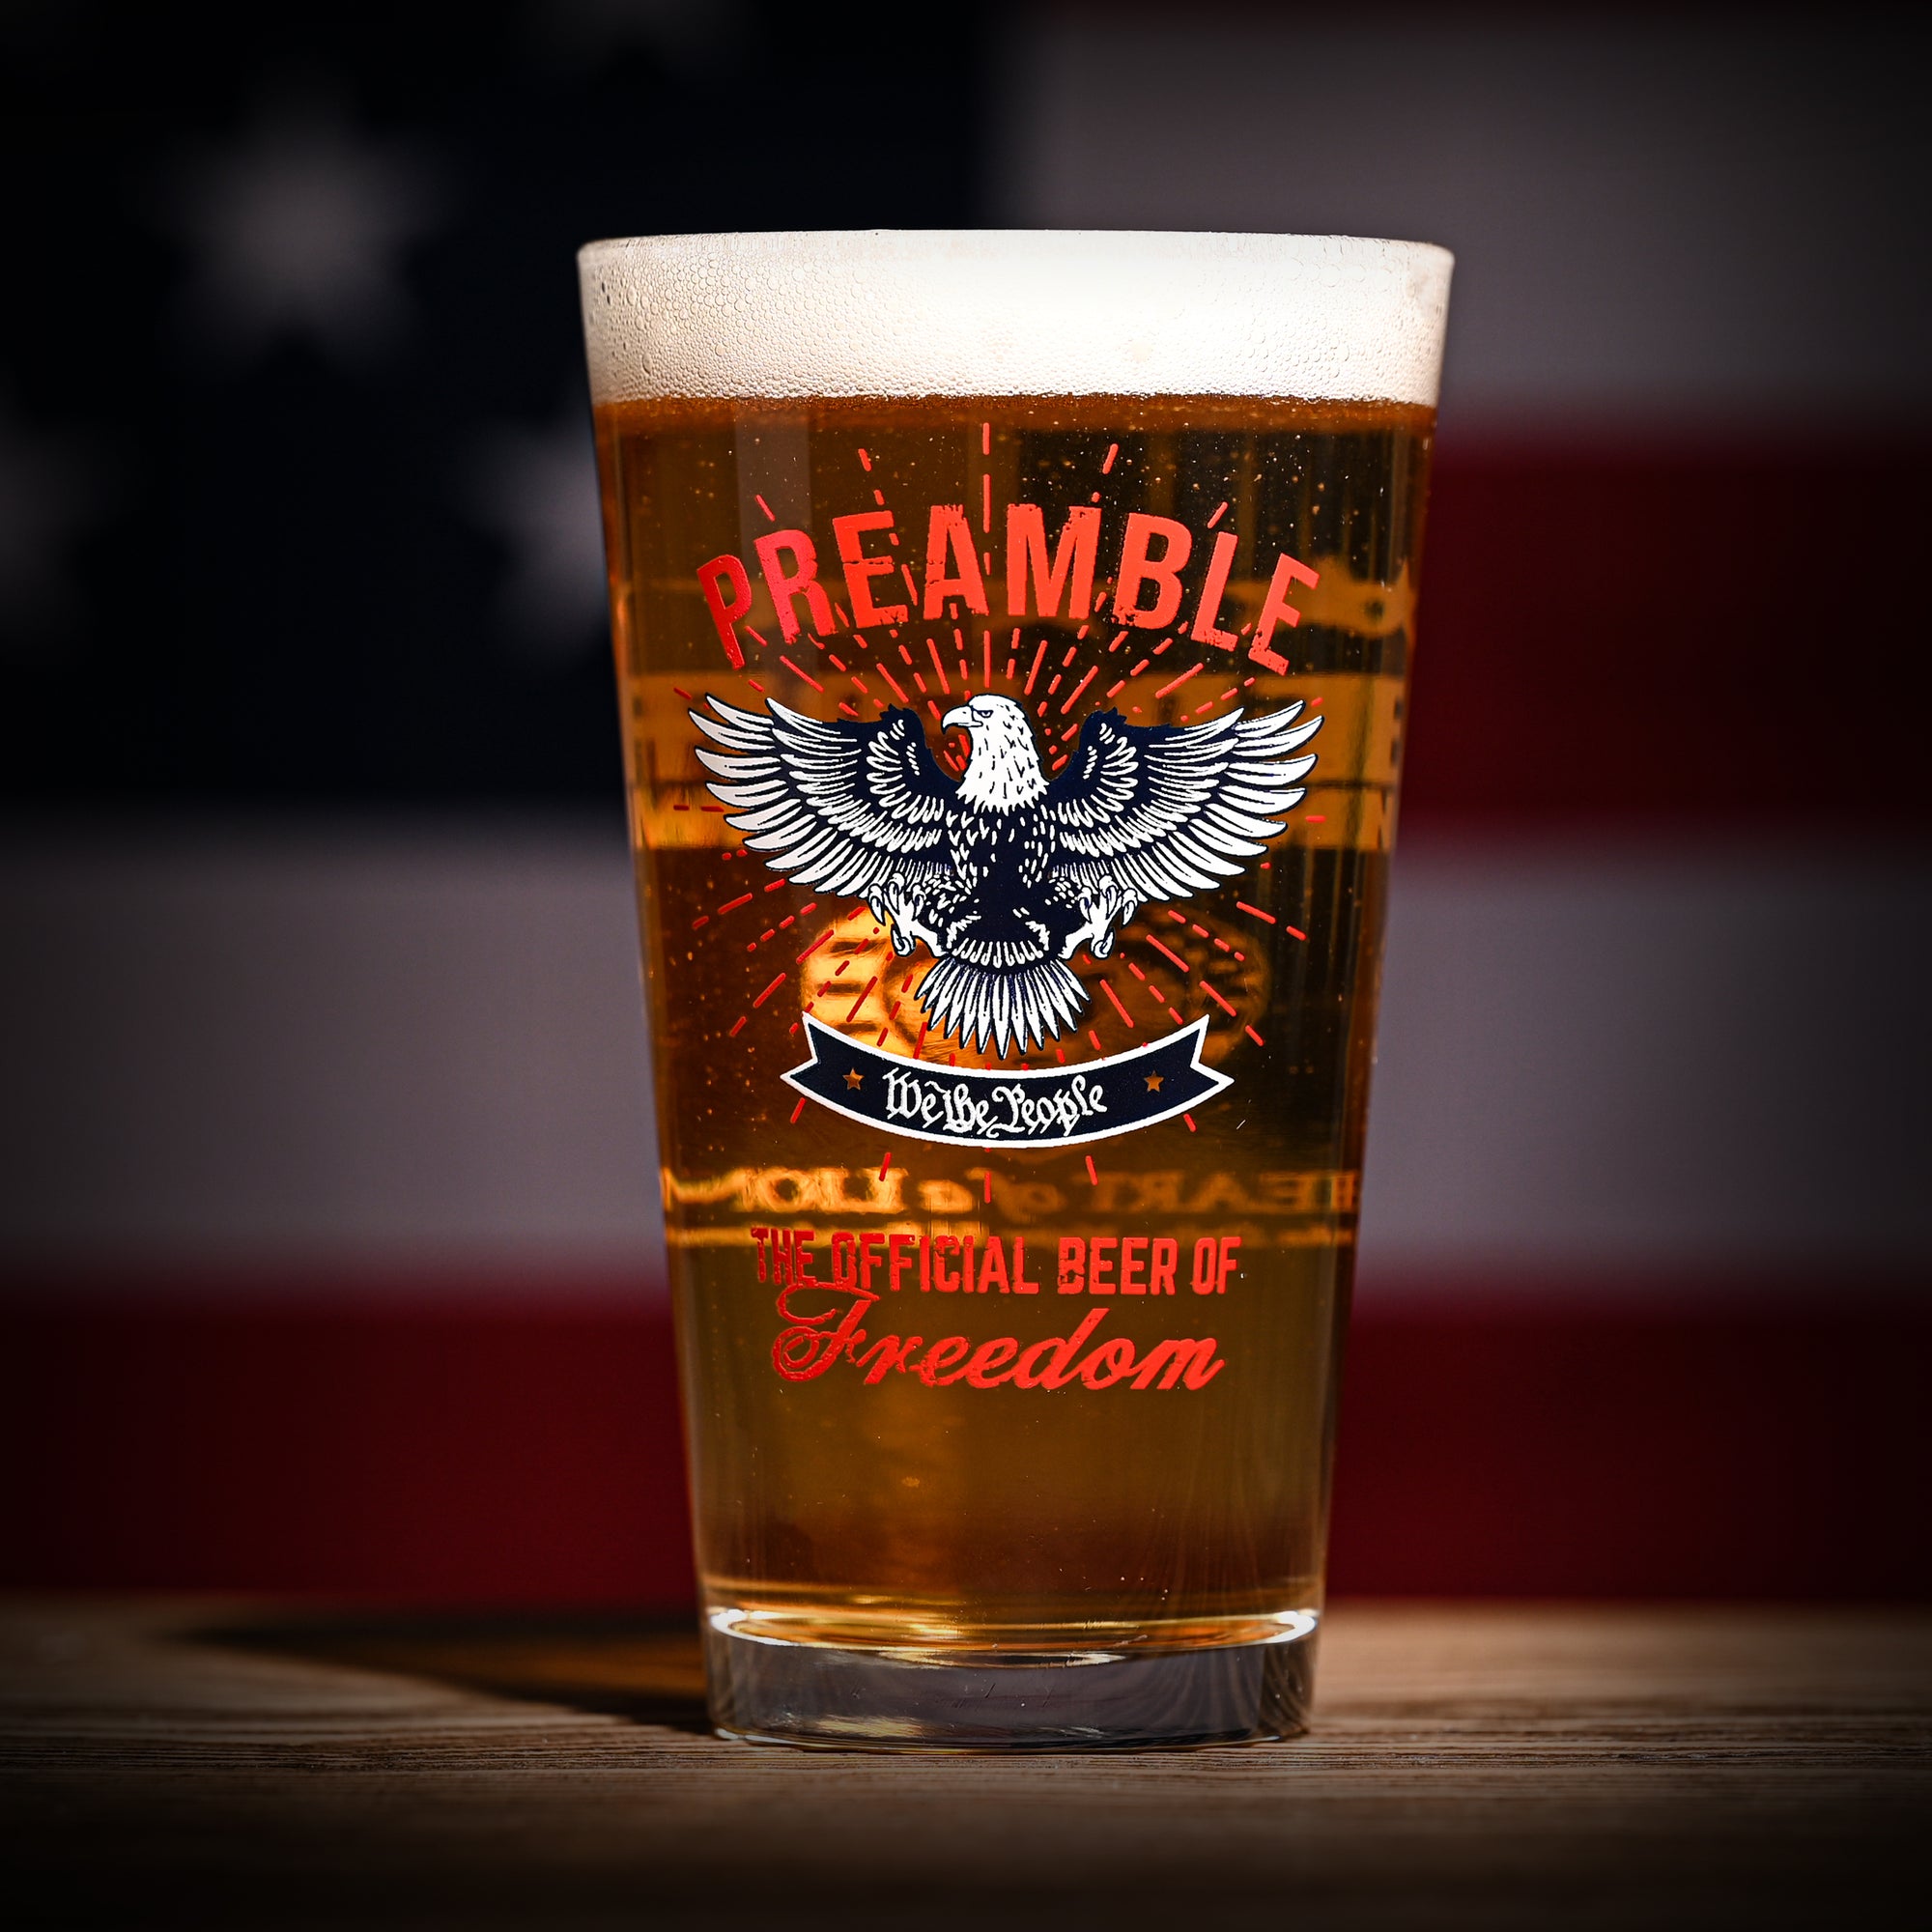 PREAMBLE - WE THE PEOPLE/JOHN DALY-MAJOR ED HEART OF A LION FOUNDATION PINT GLASS